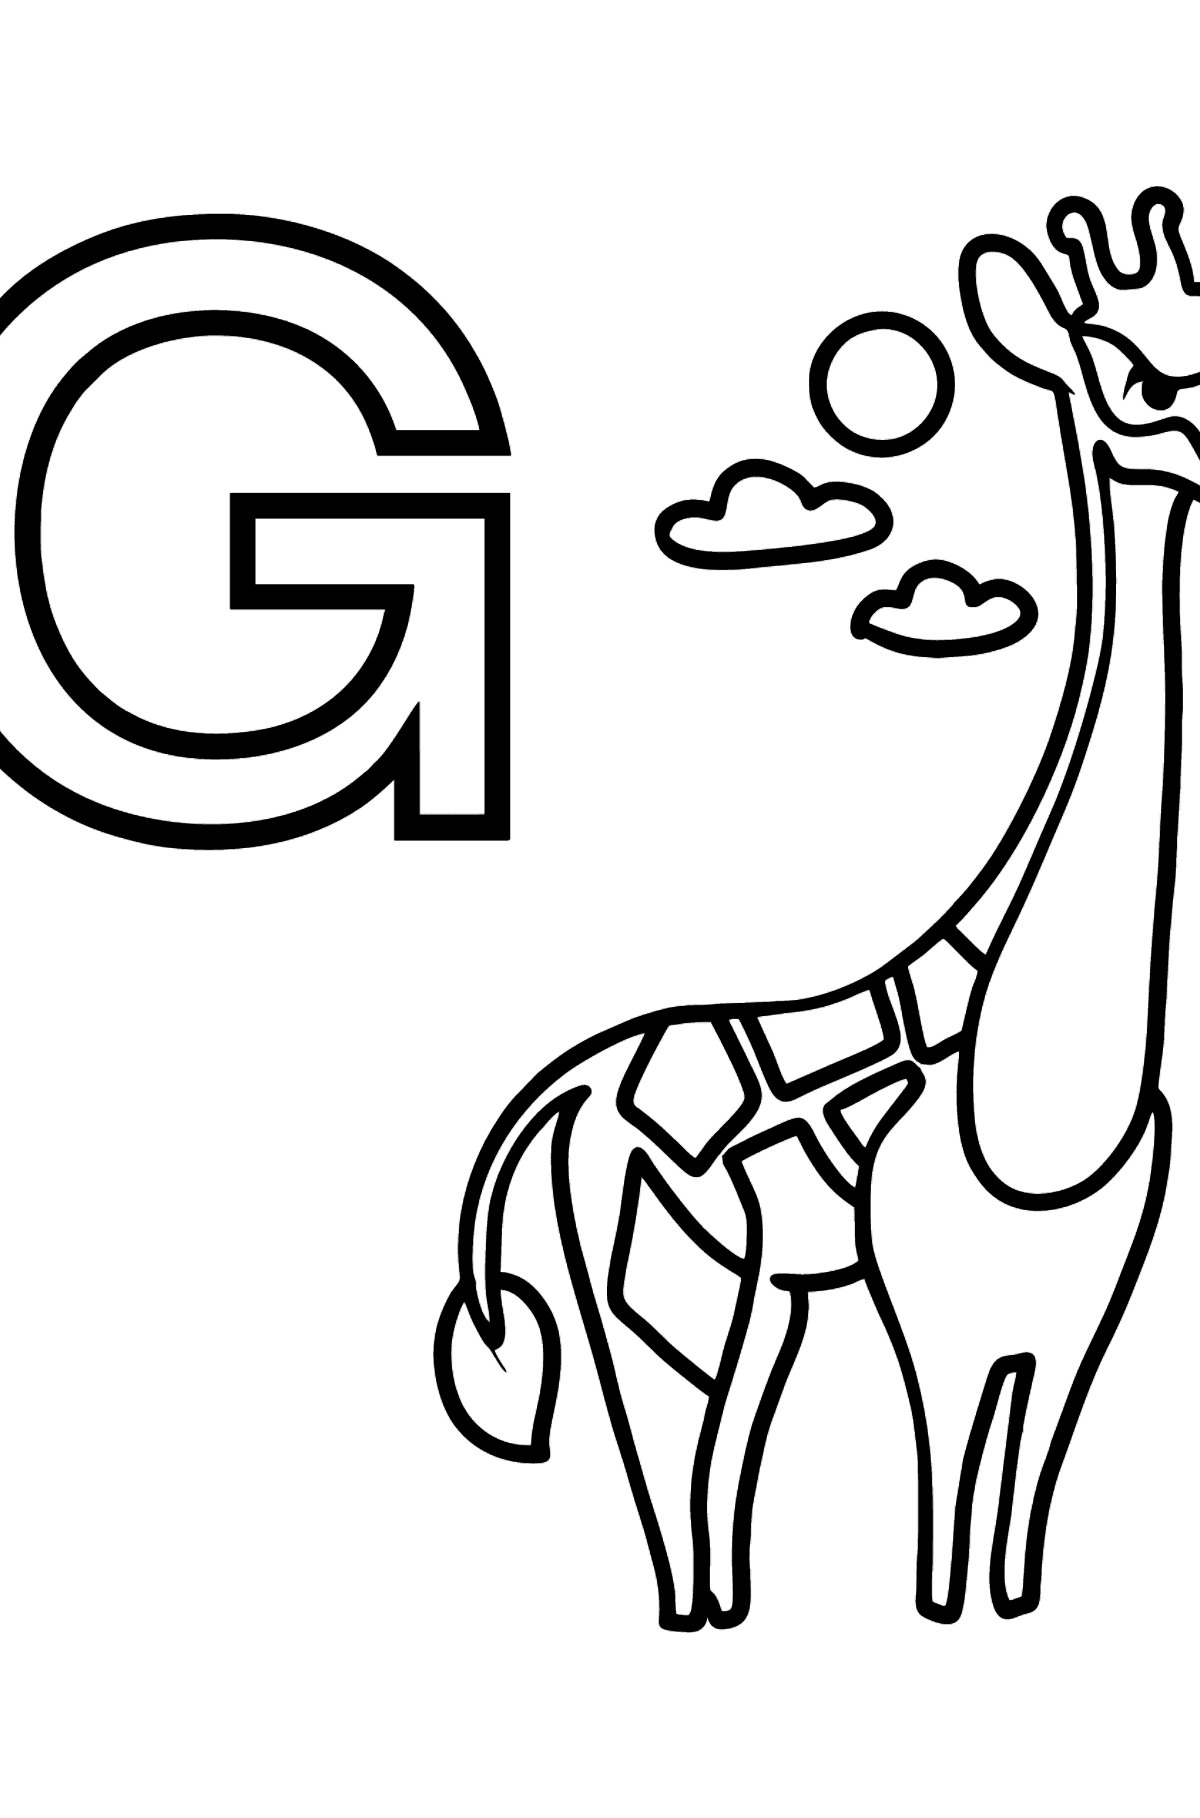 German Letter G coloring pages - GIRAFFE - Coloring Pages for Kids